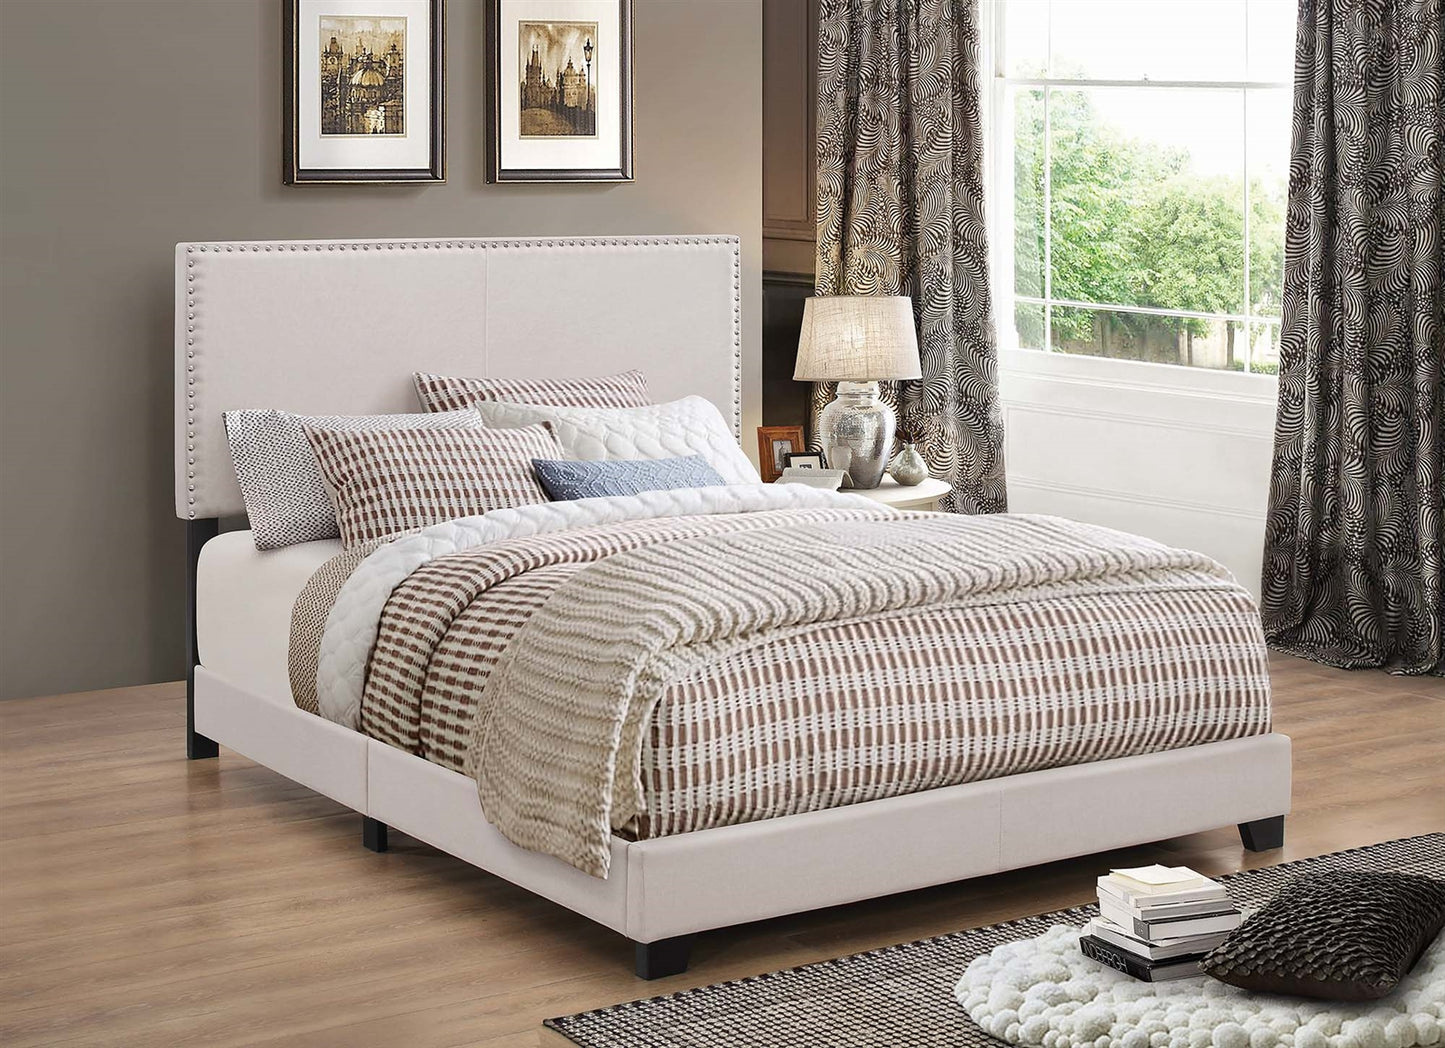 Indi Ivory Upholstered Full Bed with Nailhead Trim